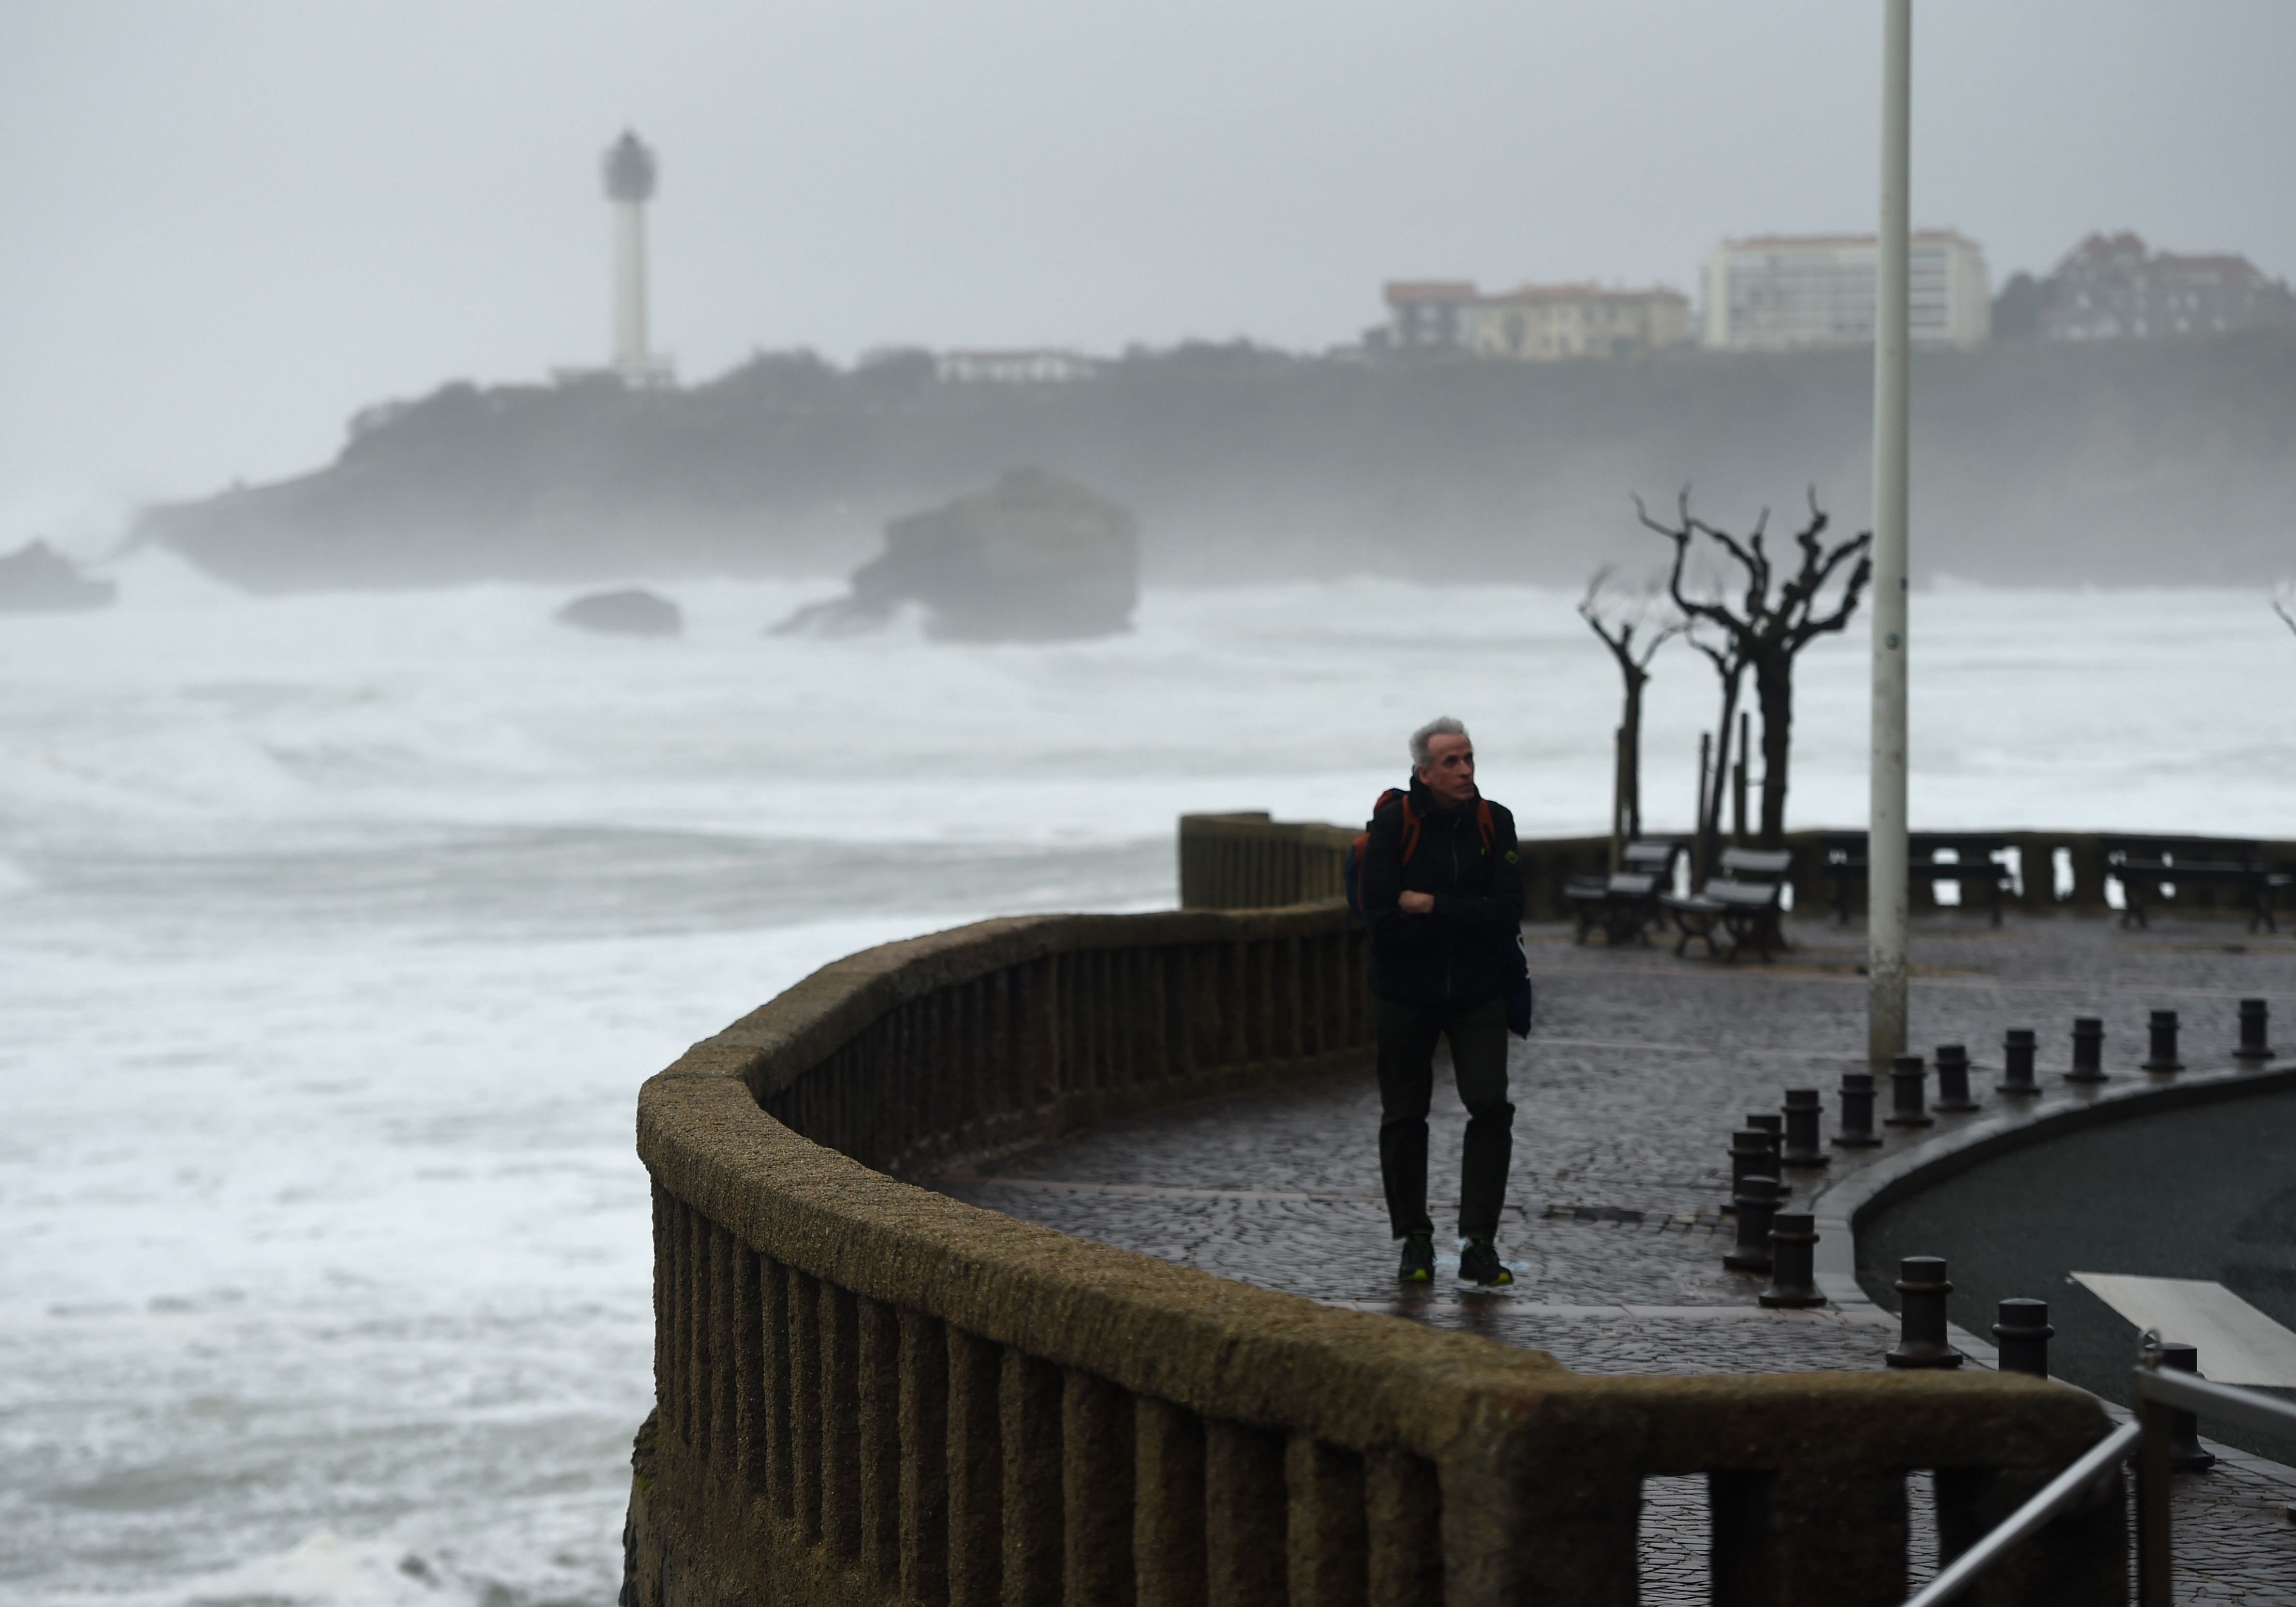 A man walks during the storm near the Grande Plage in Biarritz, southwestern France. (AFP Photo)